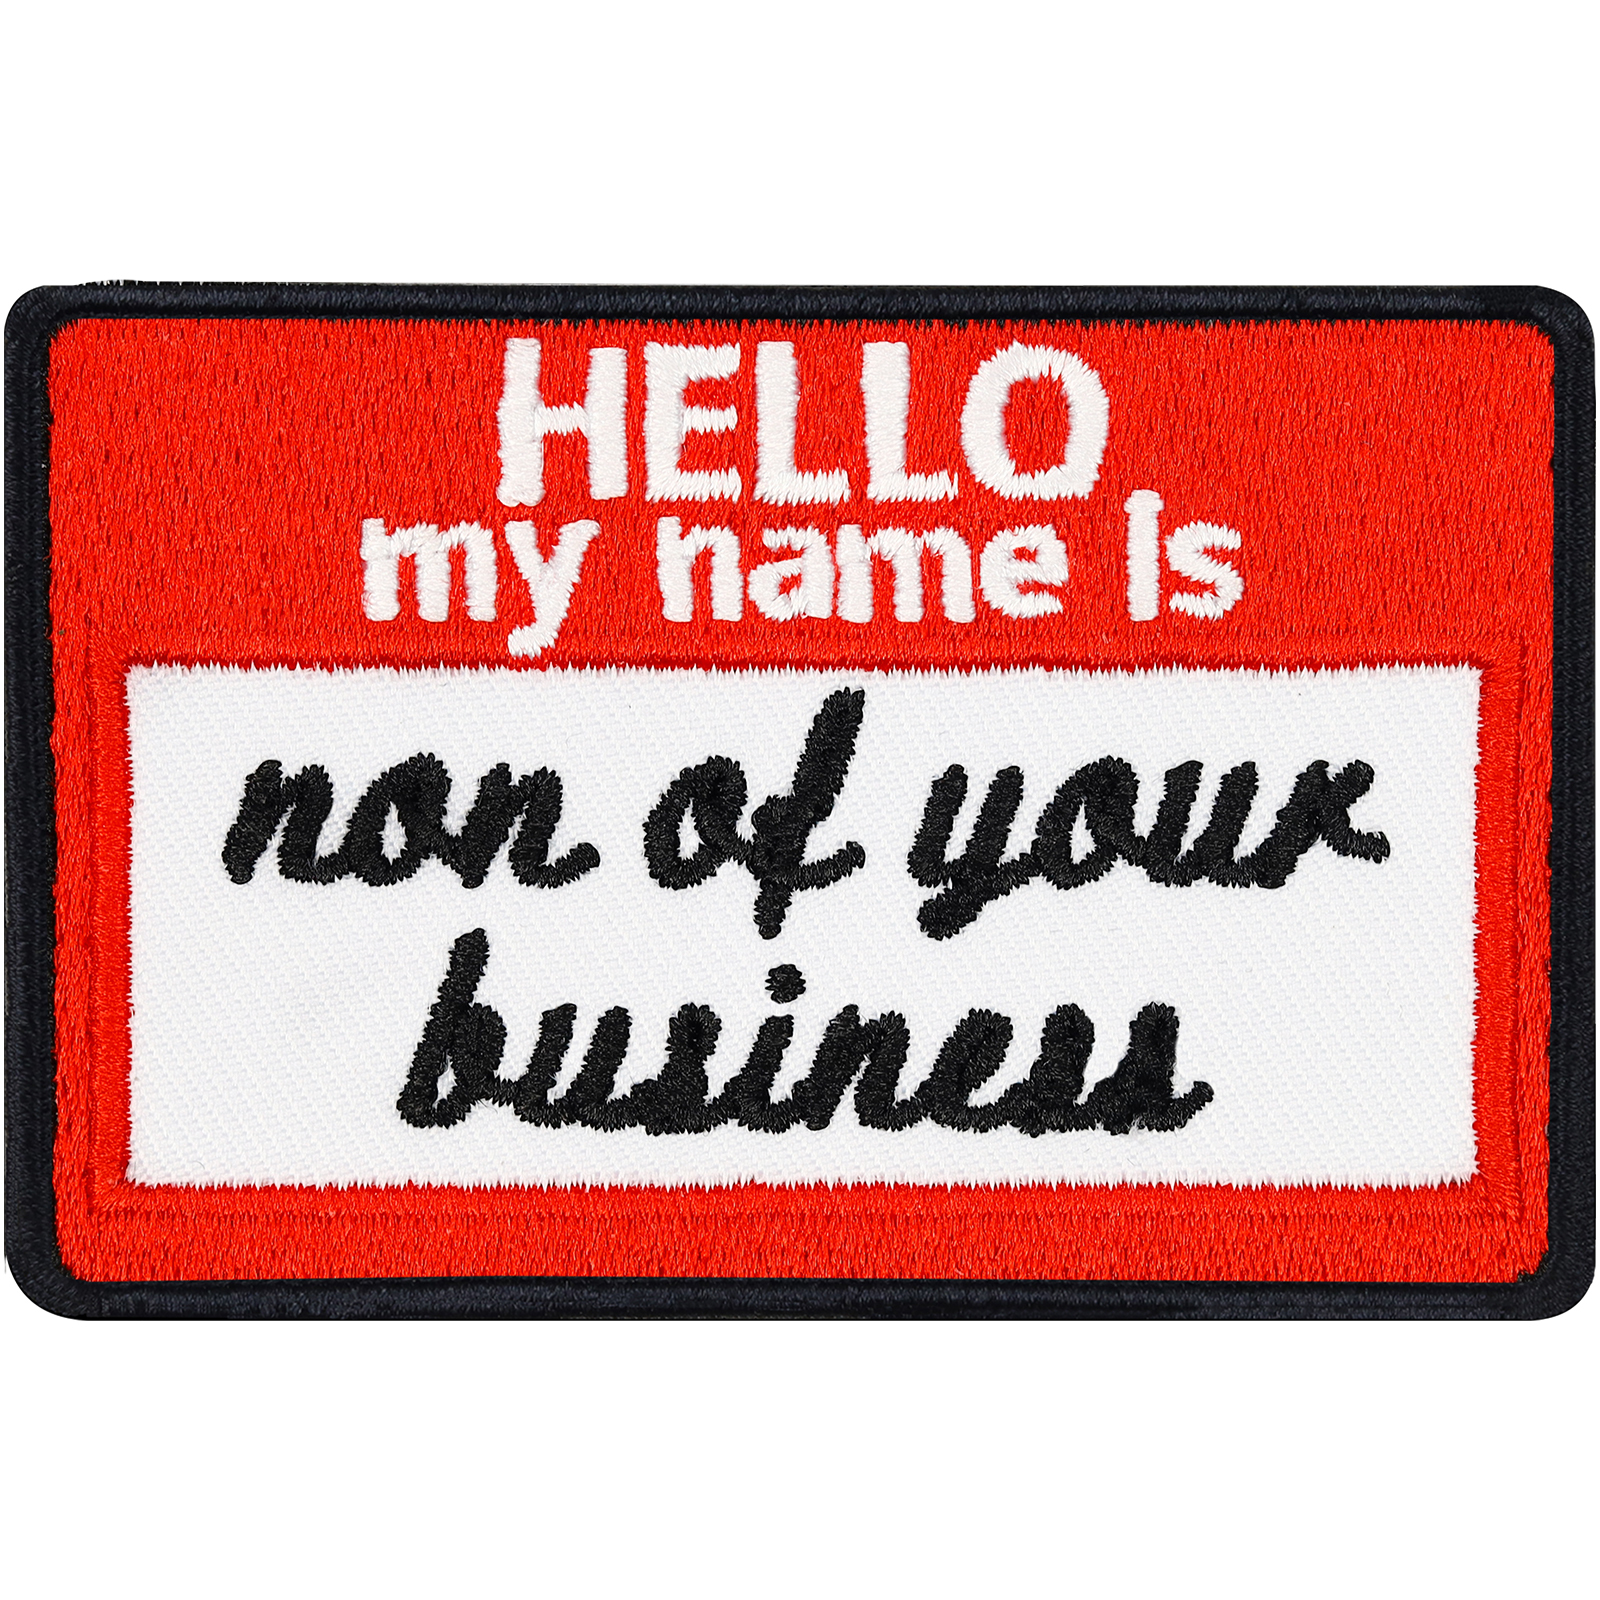 Hello, my name is... non of your business - Patch